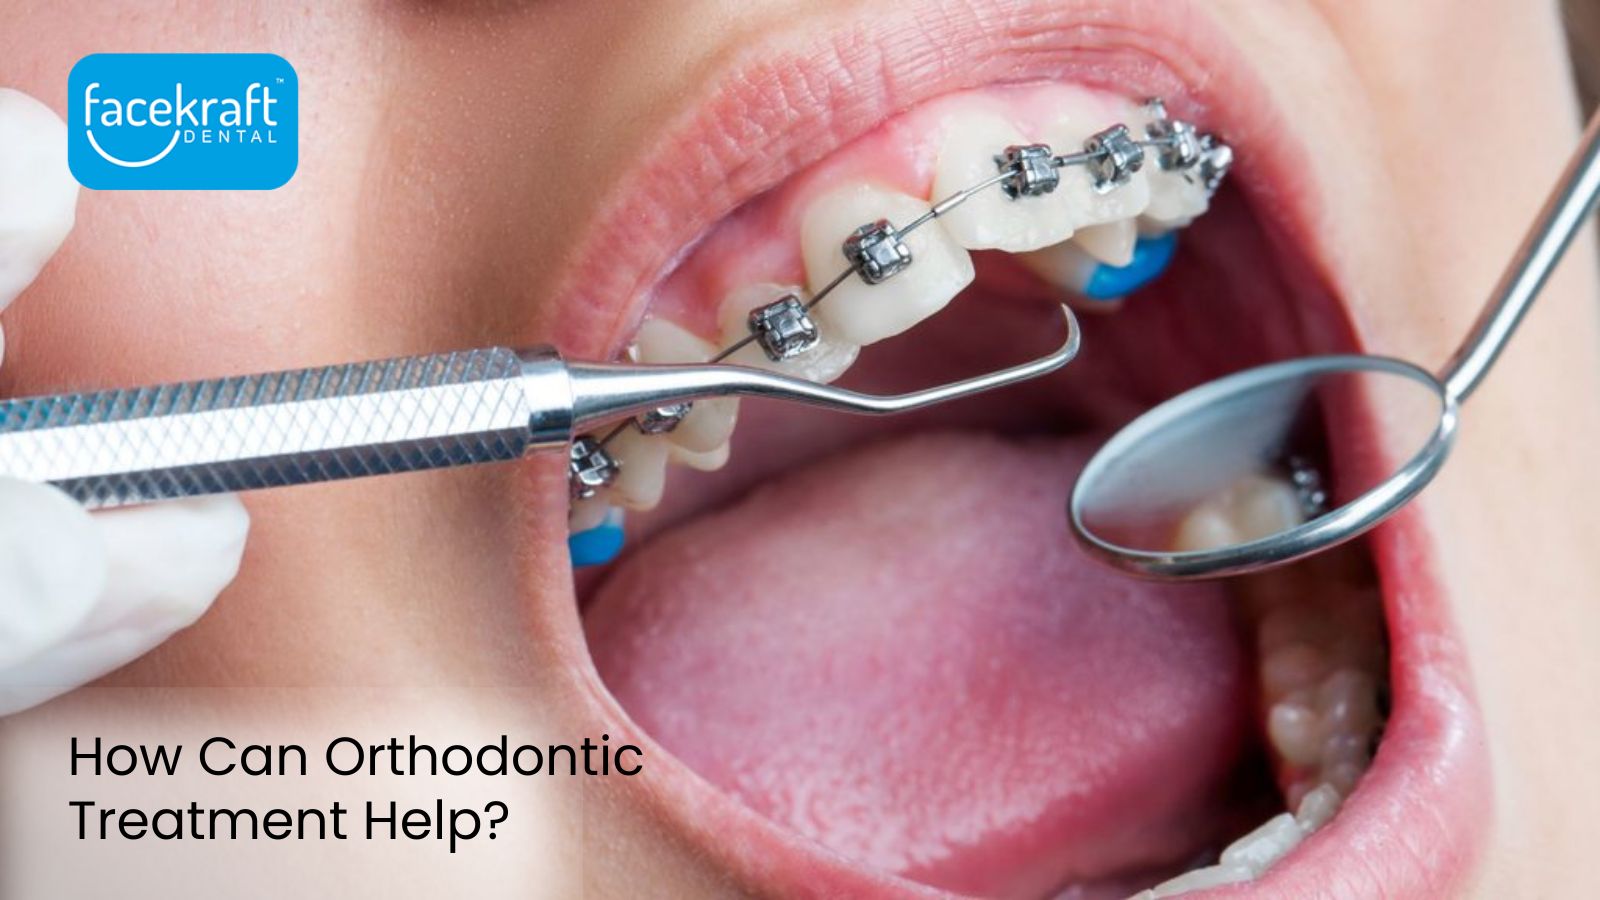 How Can Orthodontic Treatment Help?